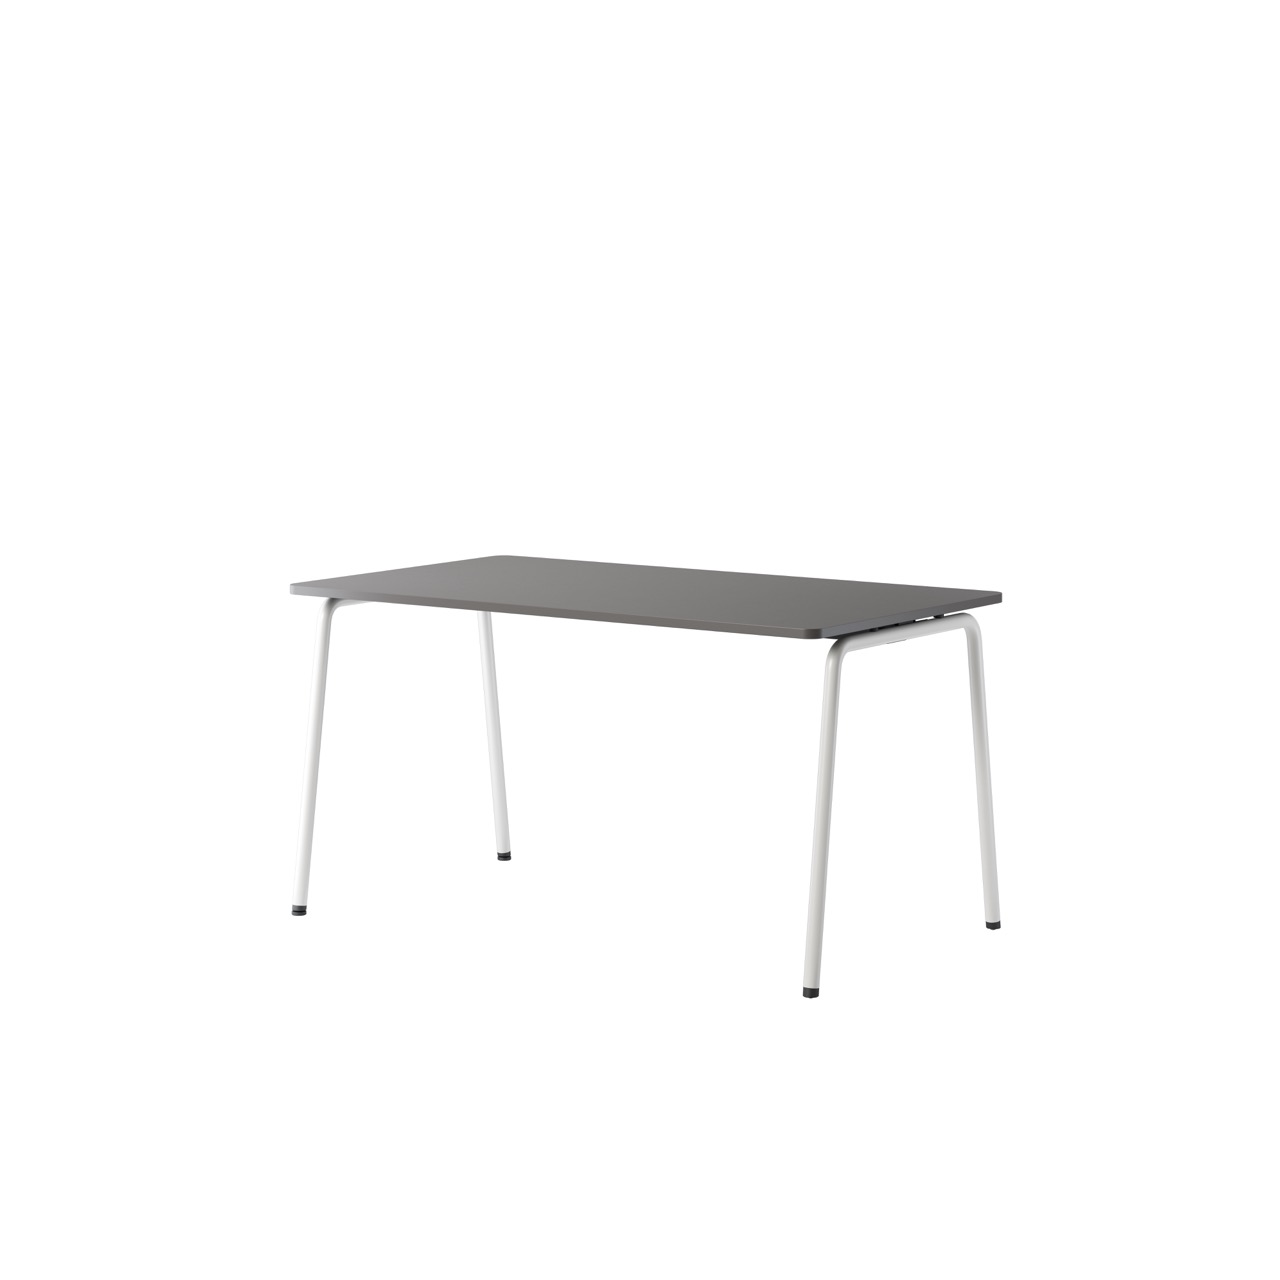 OCEE&FOUR - Tables - FourReal 74 - 140 x 80 - Angled - Packshot Image 9 Large